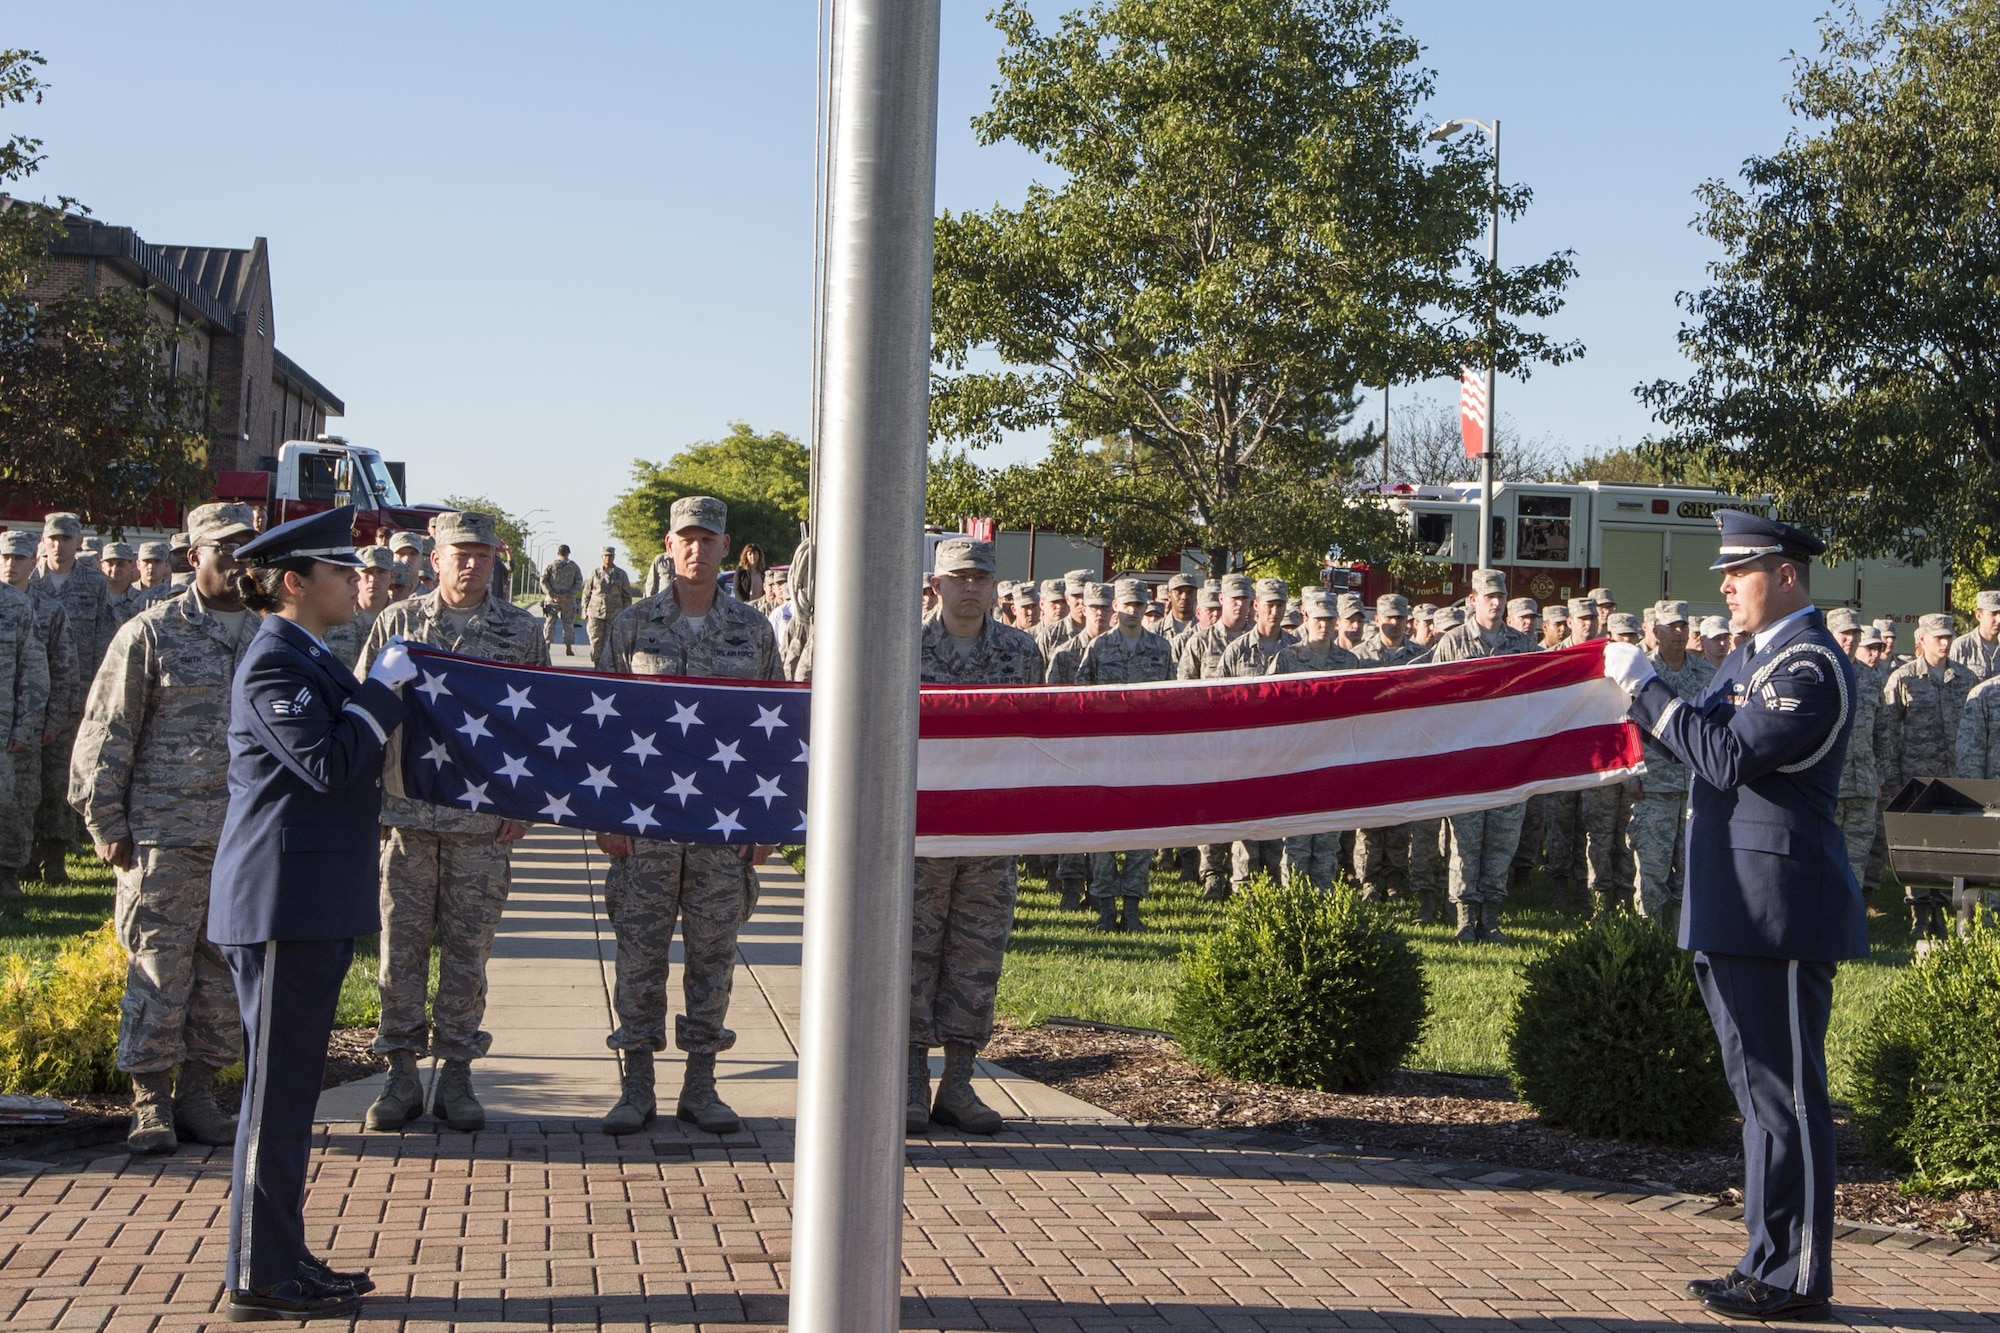 Senior Airman Stephanie Briones, Grissom base honor guard manager, and Senior Airman Ryan Ware, Grissom Base honor guard member, perform a flag folding ceremony during a 9/11 remembrance ceremony at Grissom Air Reserve Base, Ind., Sept. 11, 2016. During the event more than 500 Grissom Airmen, firefighters and civilians joined Americans around the world to share a moment of silence to remember the victims and pay their respects. (U.S. Air Force photo/Tech. Sgt. Benjamin Mota)